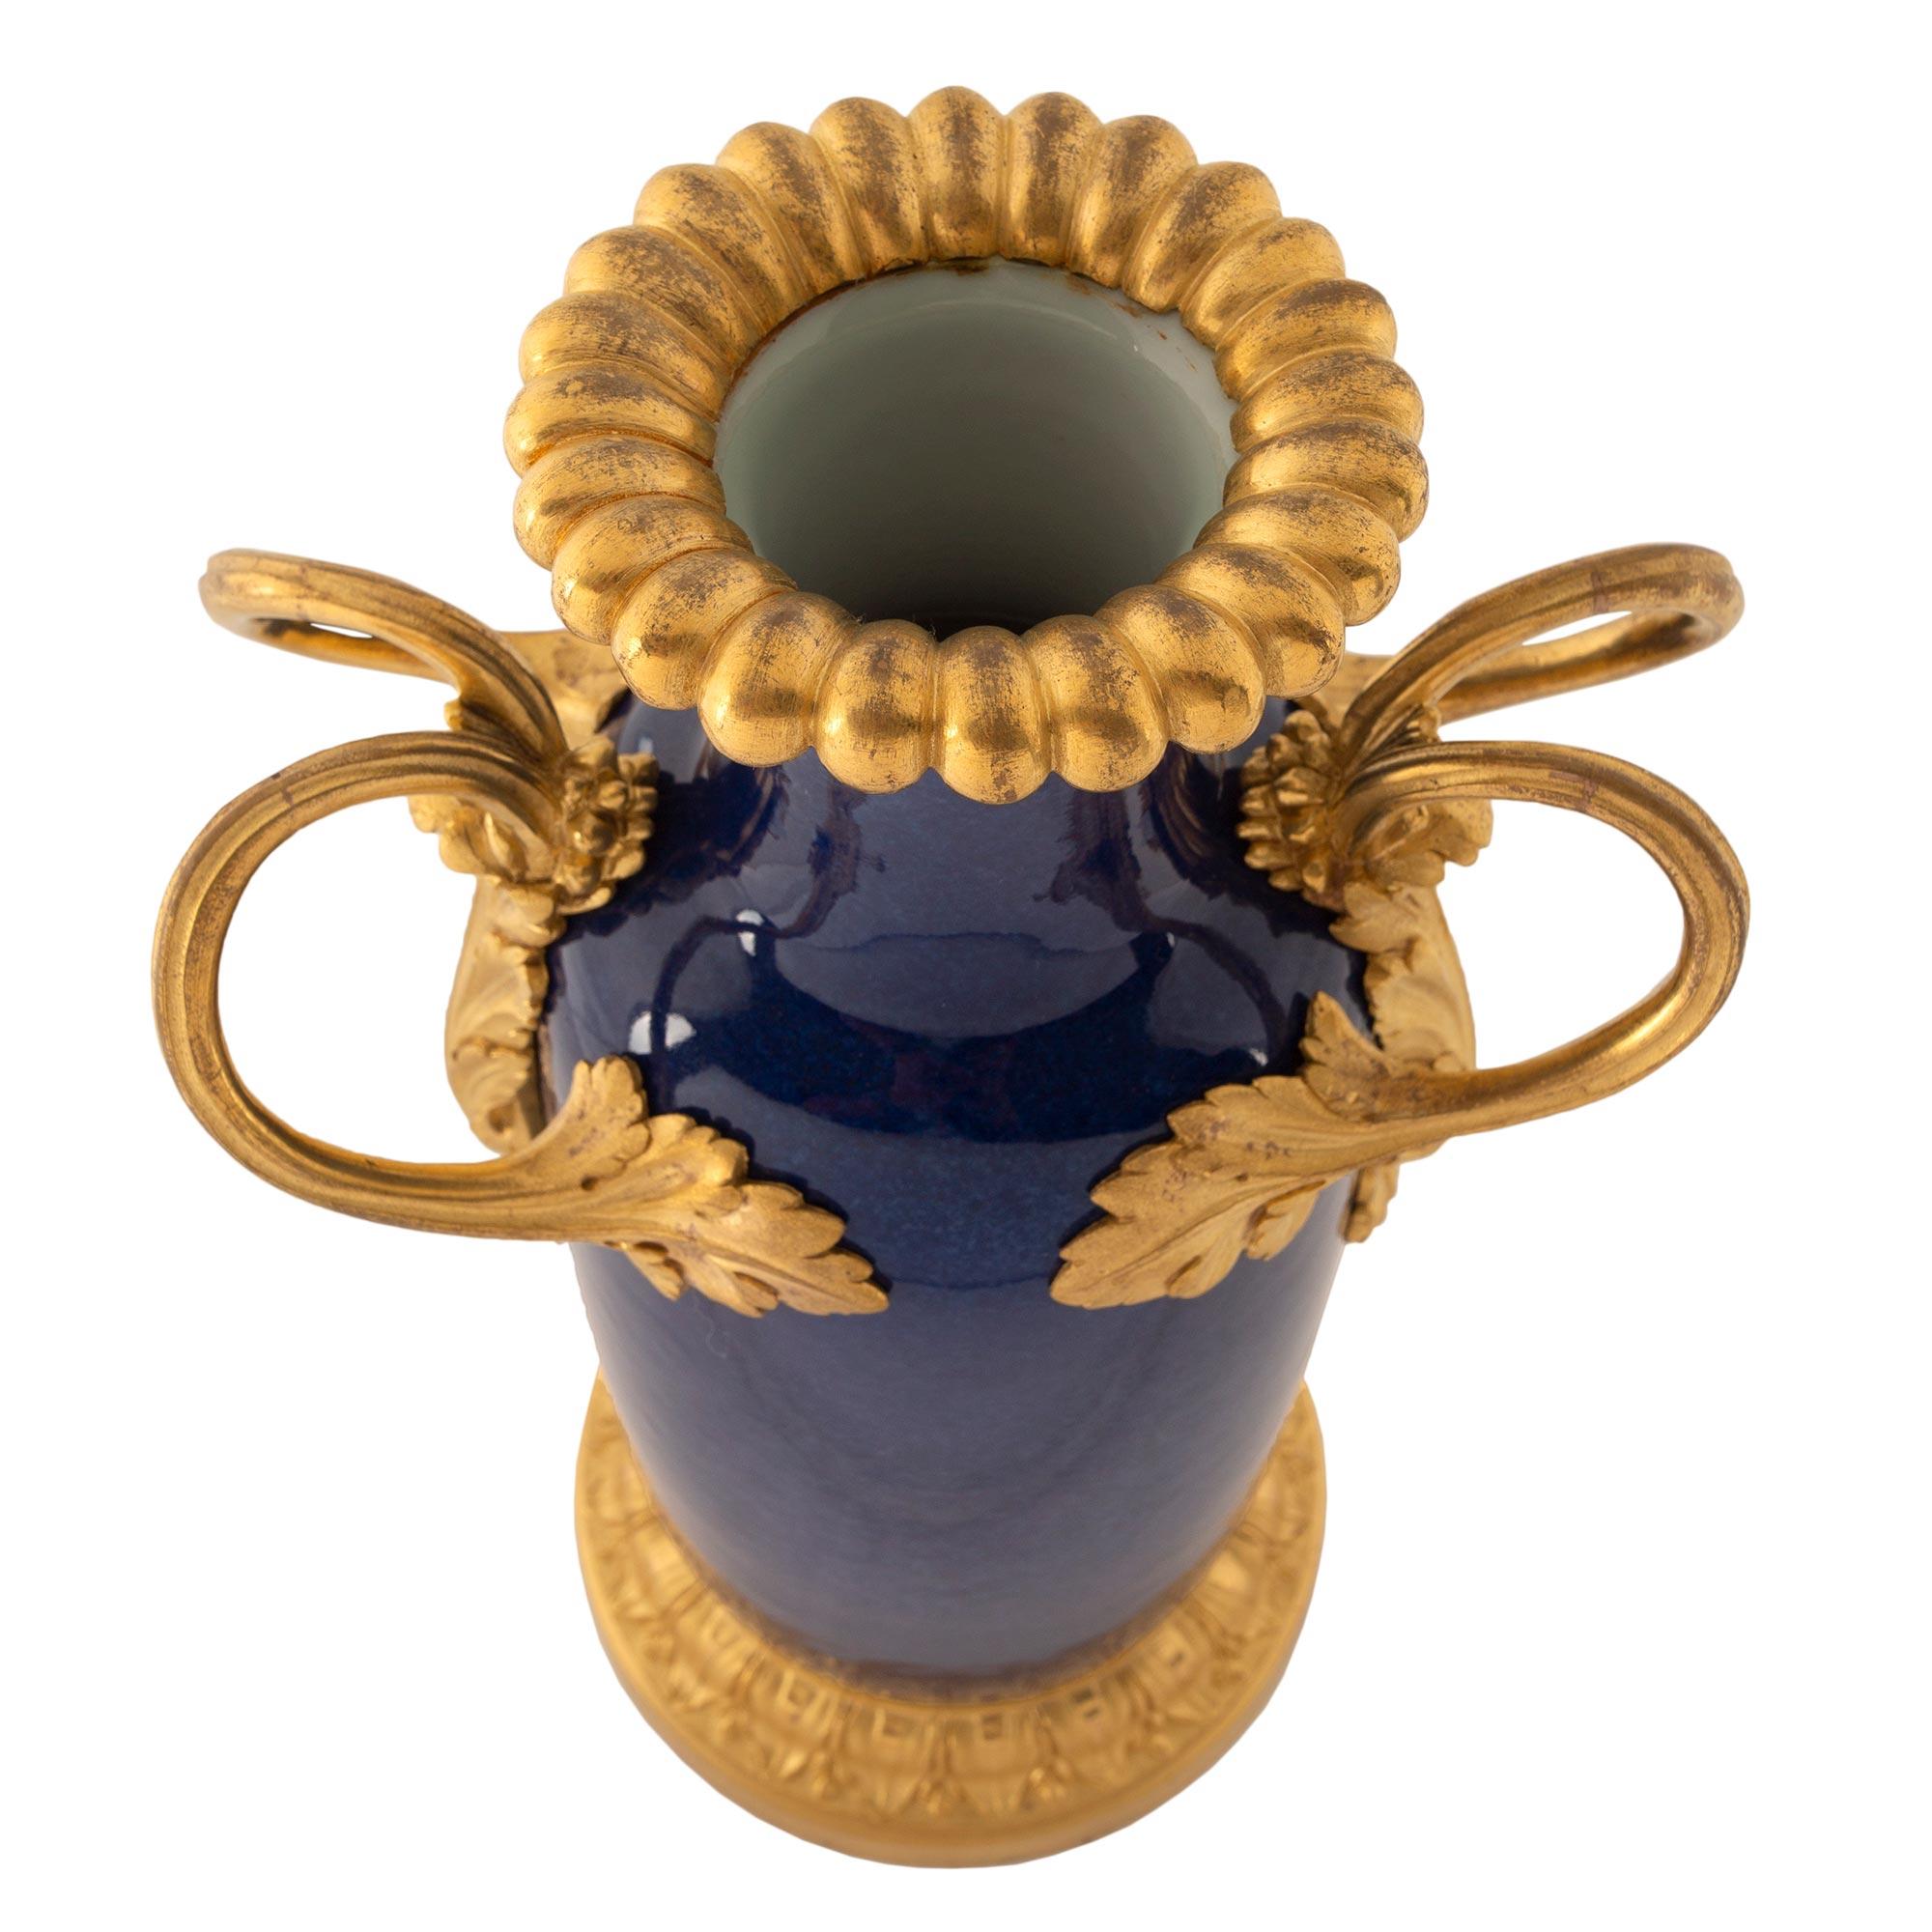 A fine pair of French Louis XVI st. 19th century cobalt blue and ormolu mounted vases. The pair are raised by a circular mottled ormolu base with an elegant Coeur de Rai design. The rich cobalt blue urns are flanked by two scrolled ormolu handles in